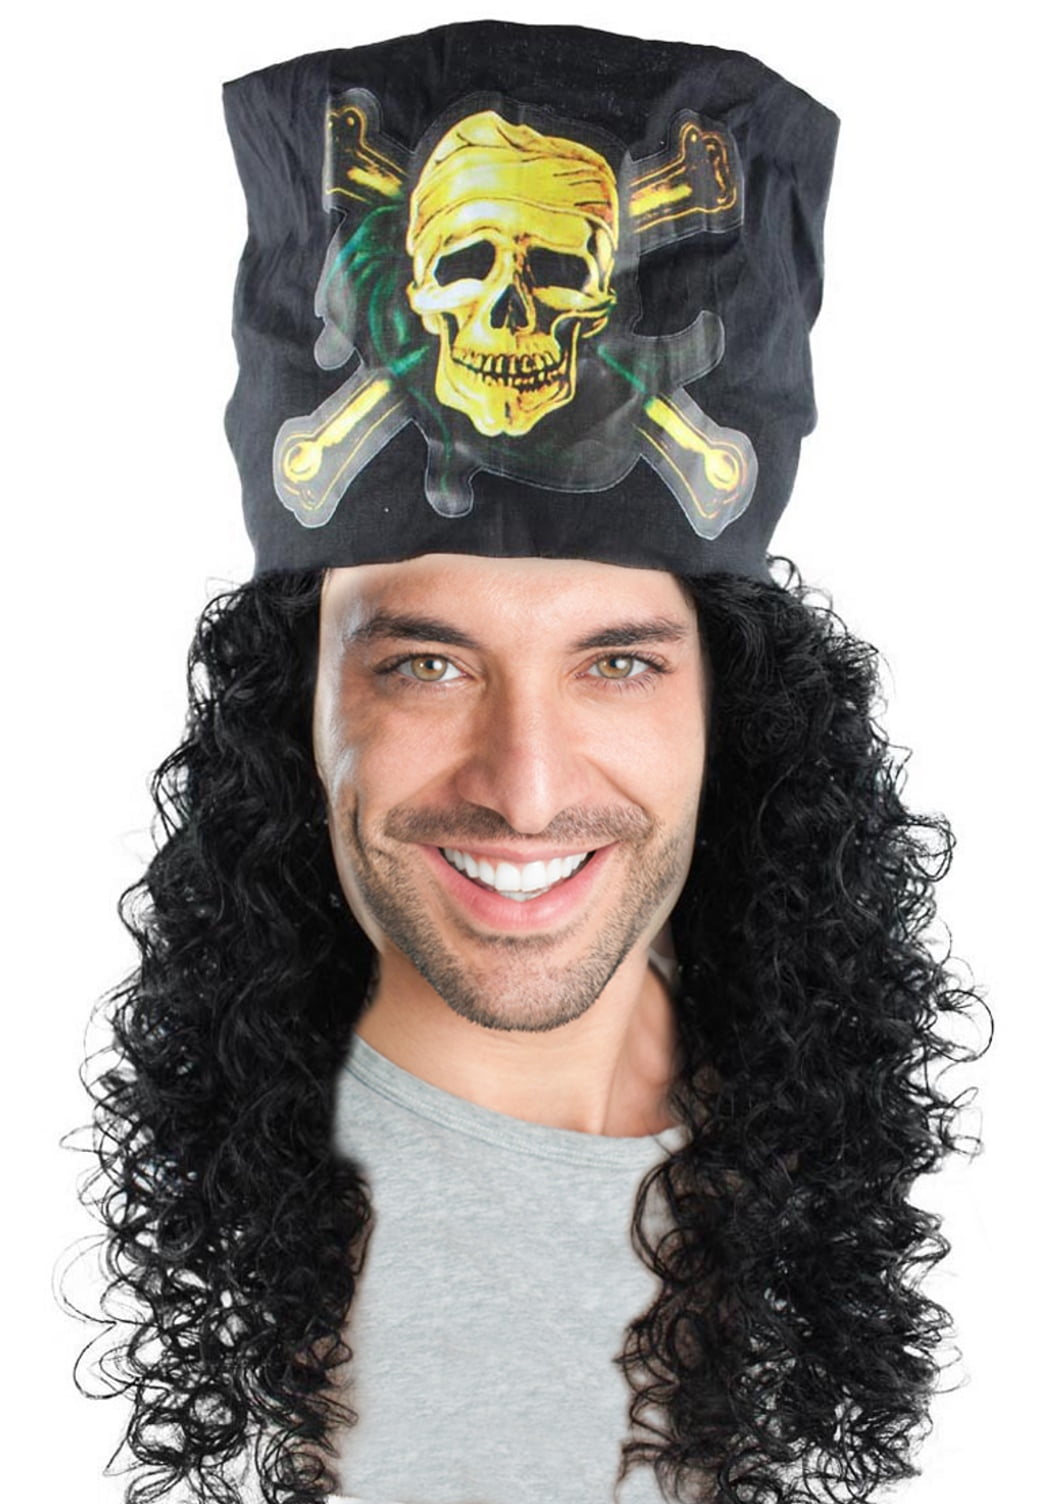 Cece Mens Pirate Wig Captain Hook Hair Wigs for Cosplay Costume Party  Halloween, Black 